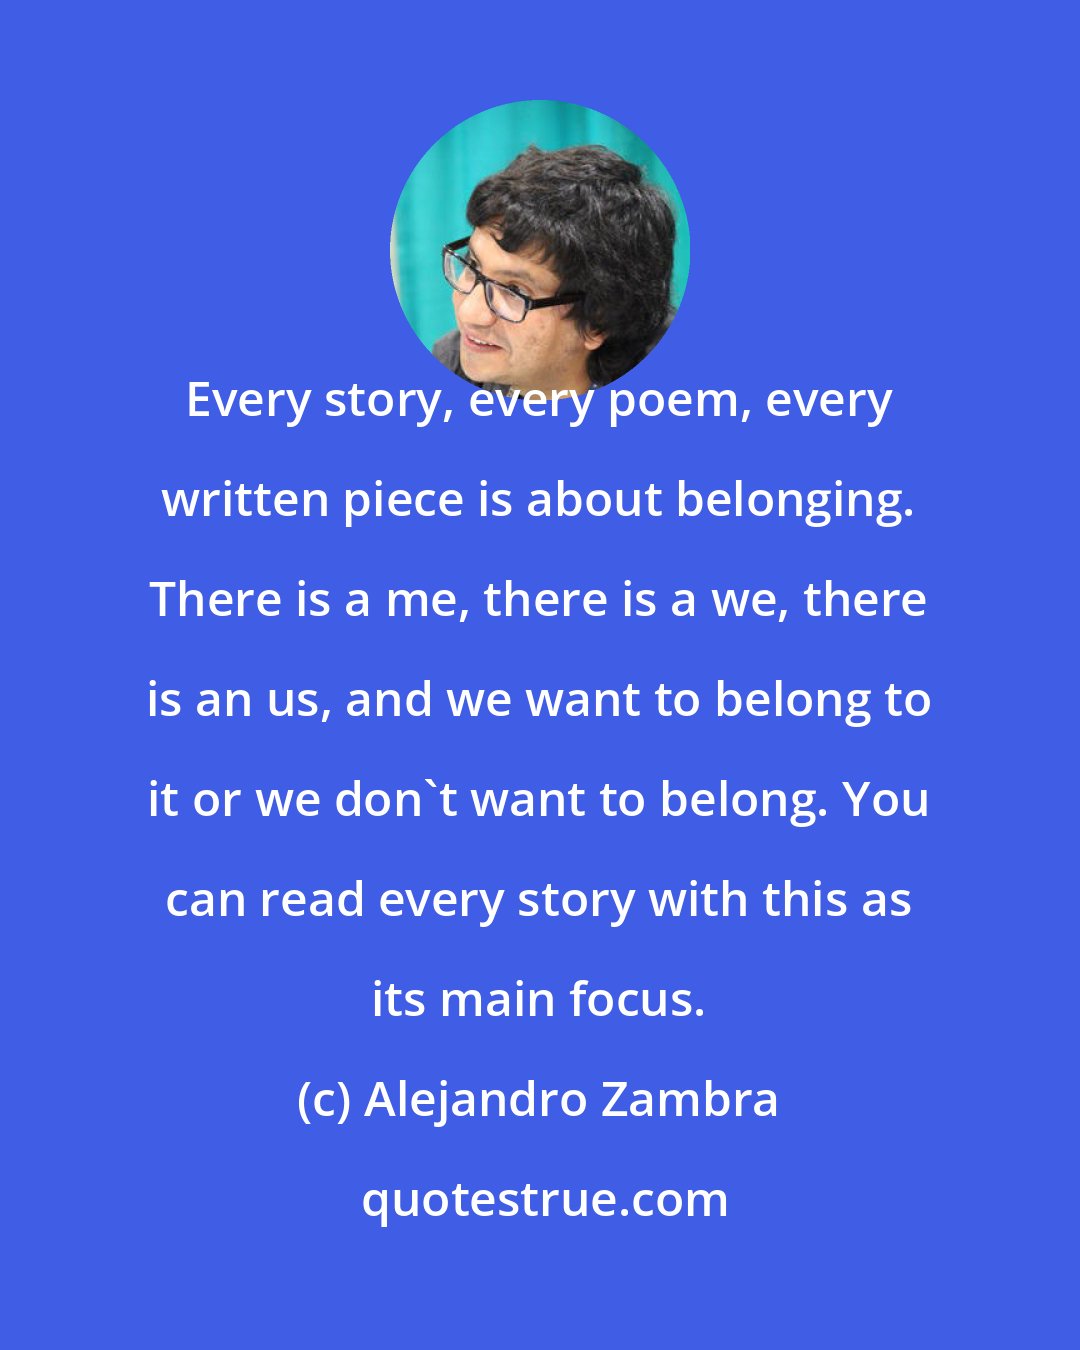 Alejandro Zambra: Every story, every poem, every written piece is about belonging. There is a me, there is a we, there is an us, and we want to belong to it or we don't want to belong. You can read every story with this as its main focus.